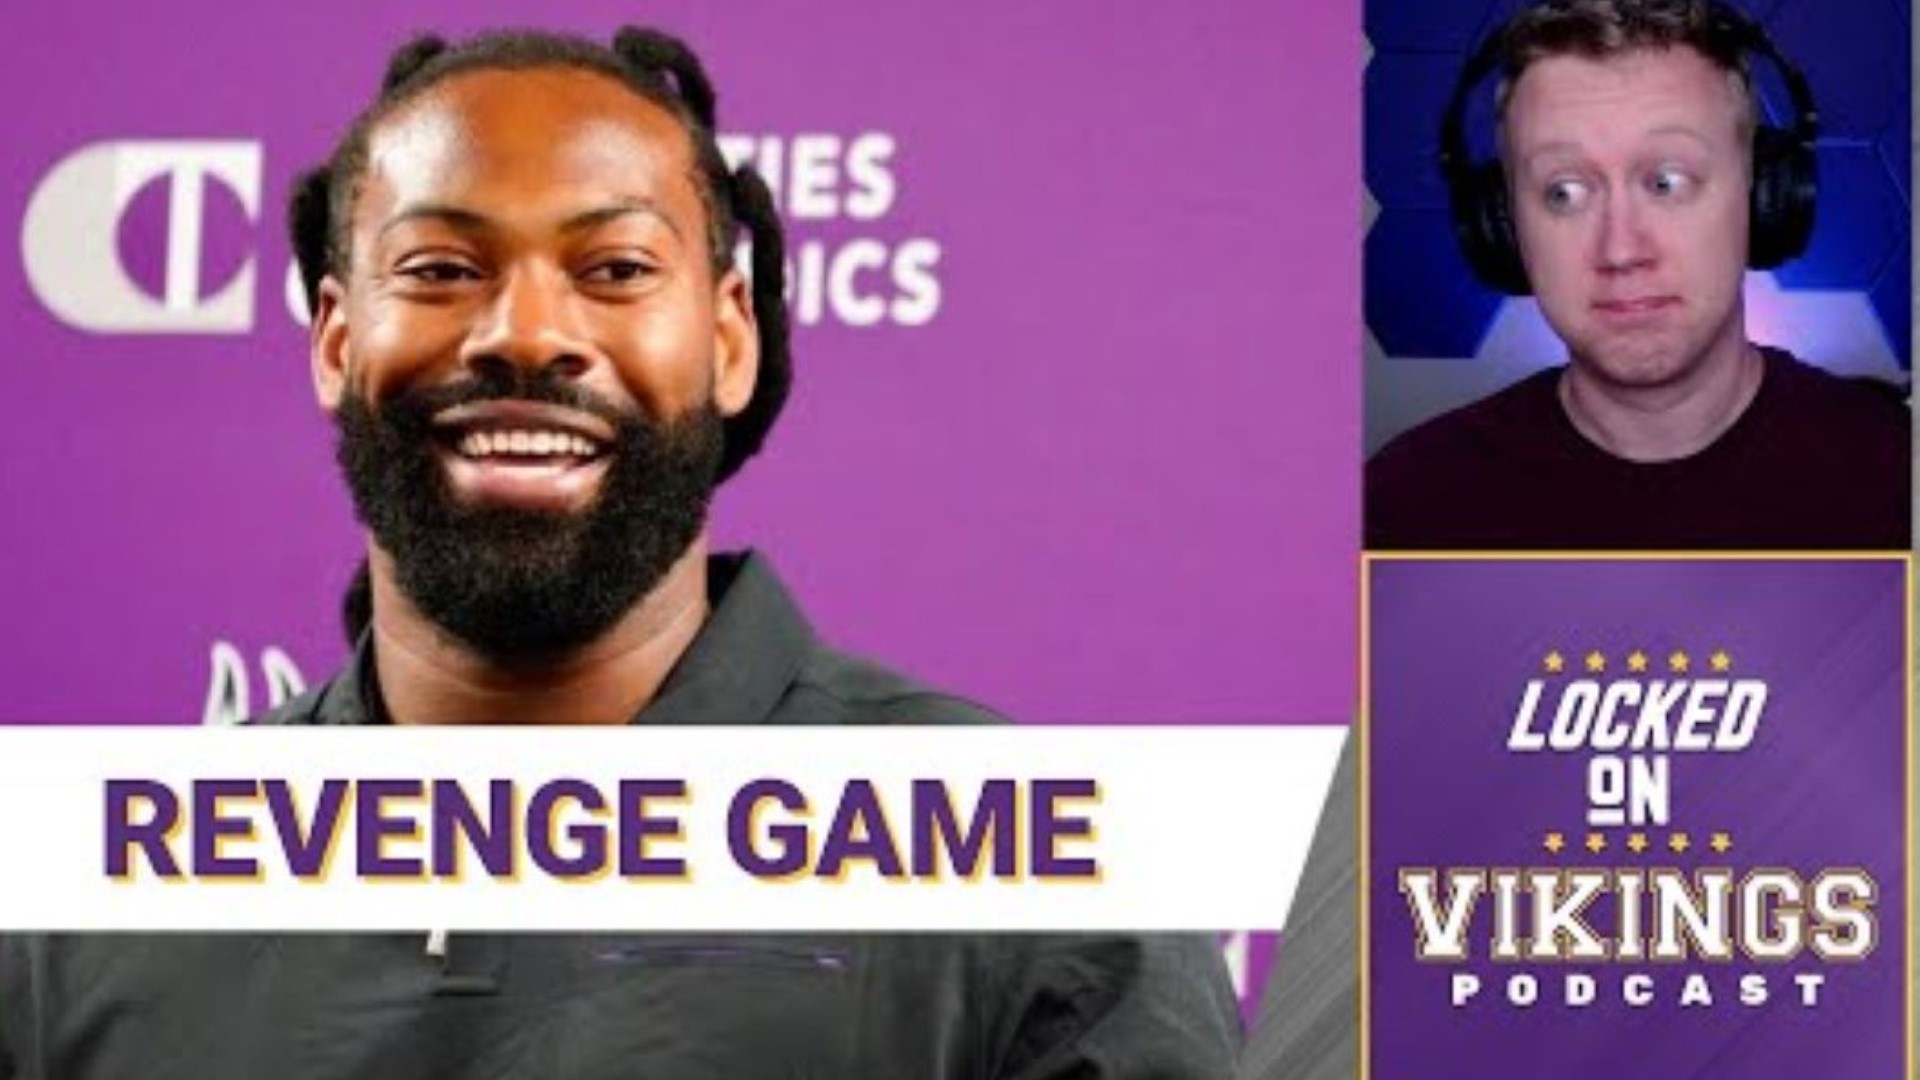 Why is Za'Darius Smith so mad? In case you weren't paying attention, he's got a lot of beef with the Green Bay Packers, and they're coming to town.